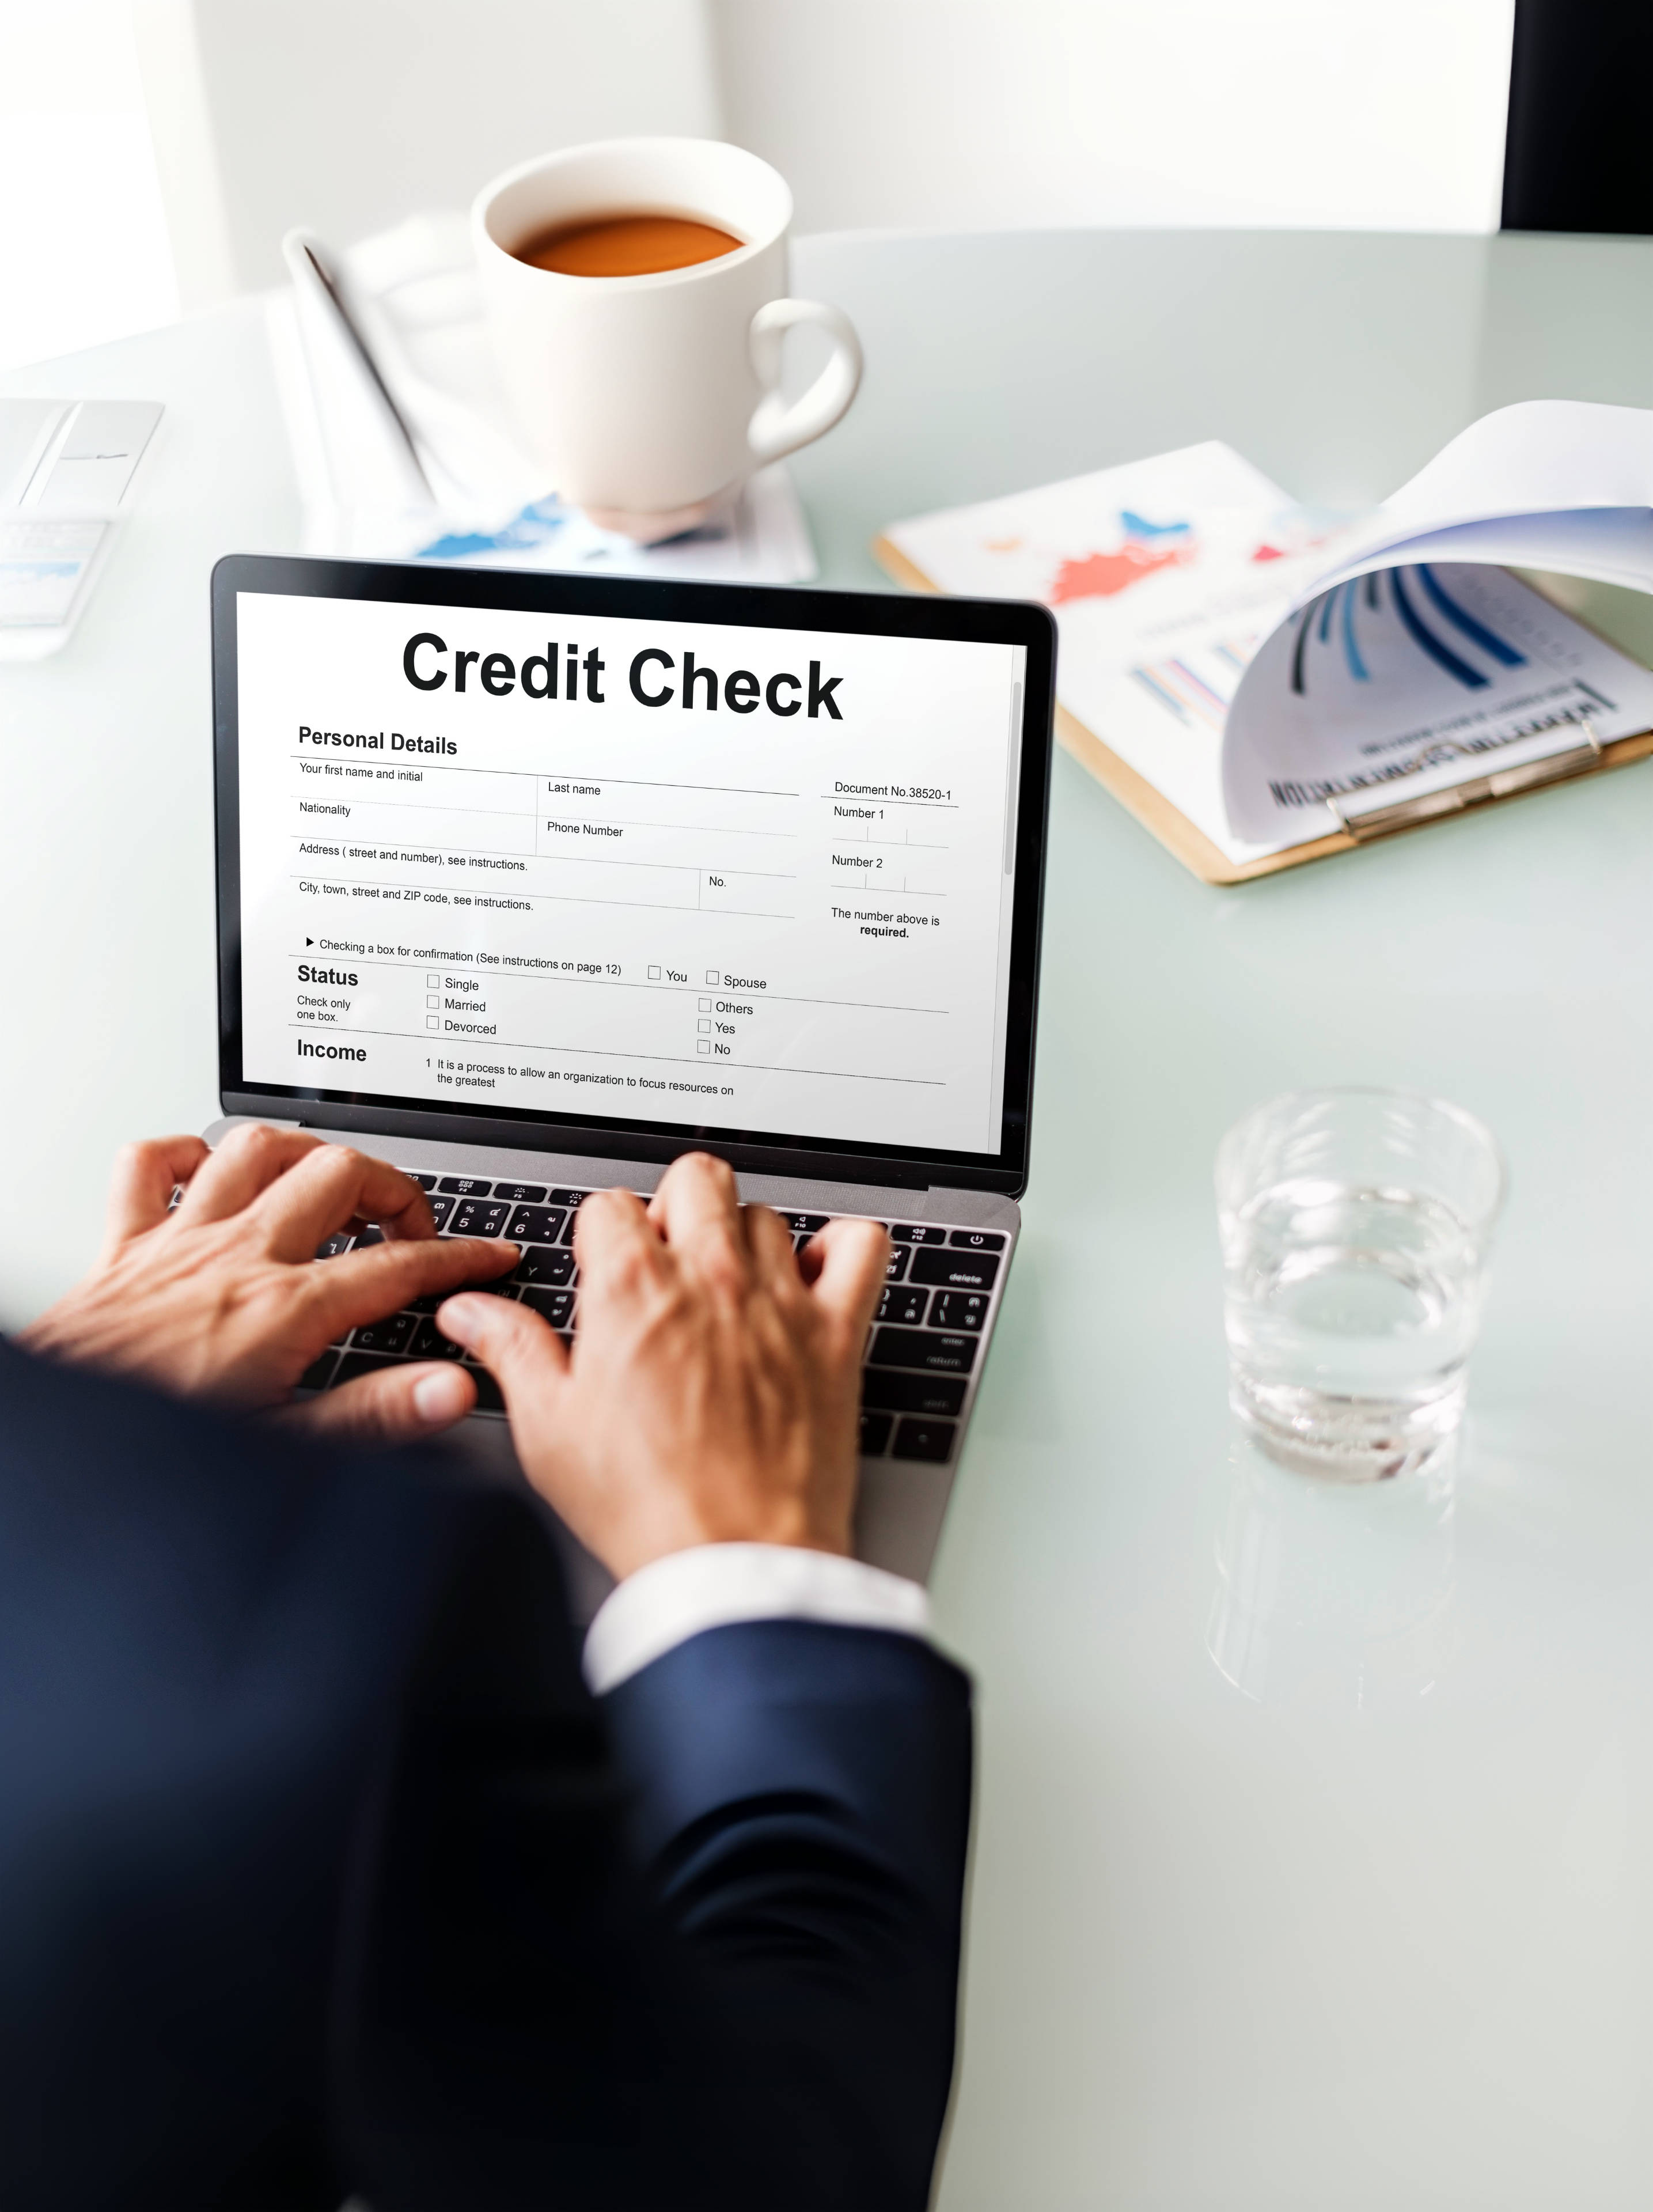 What landlords look for in a credit check?